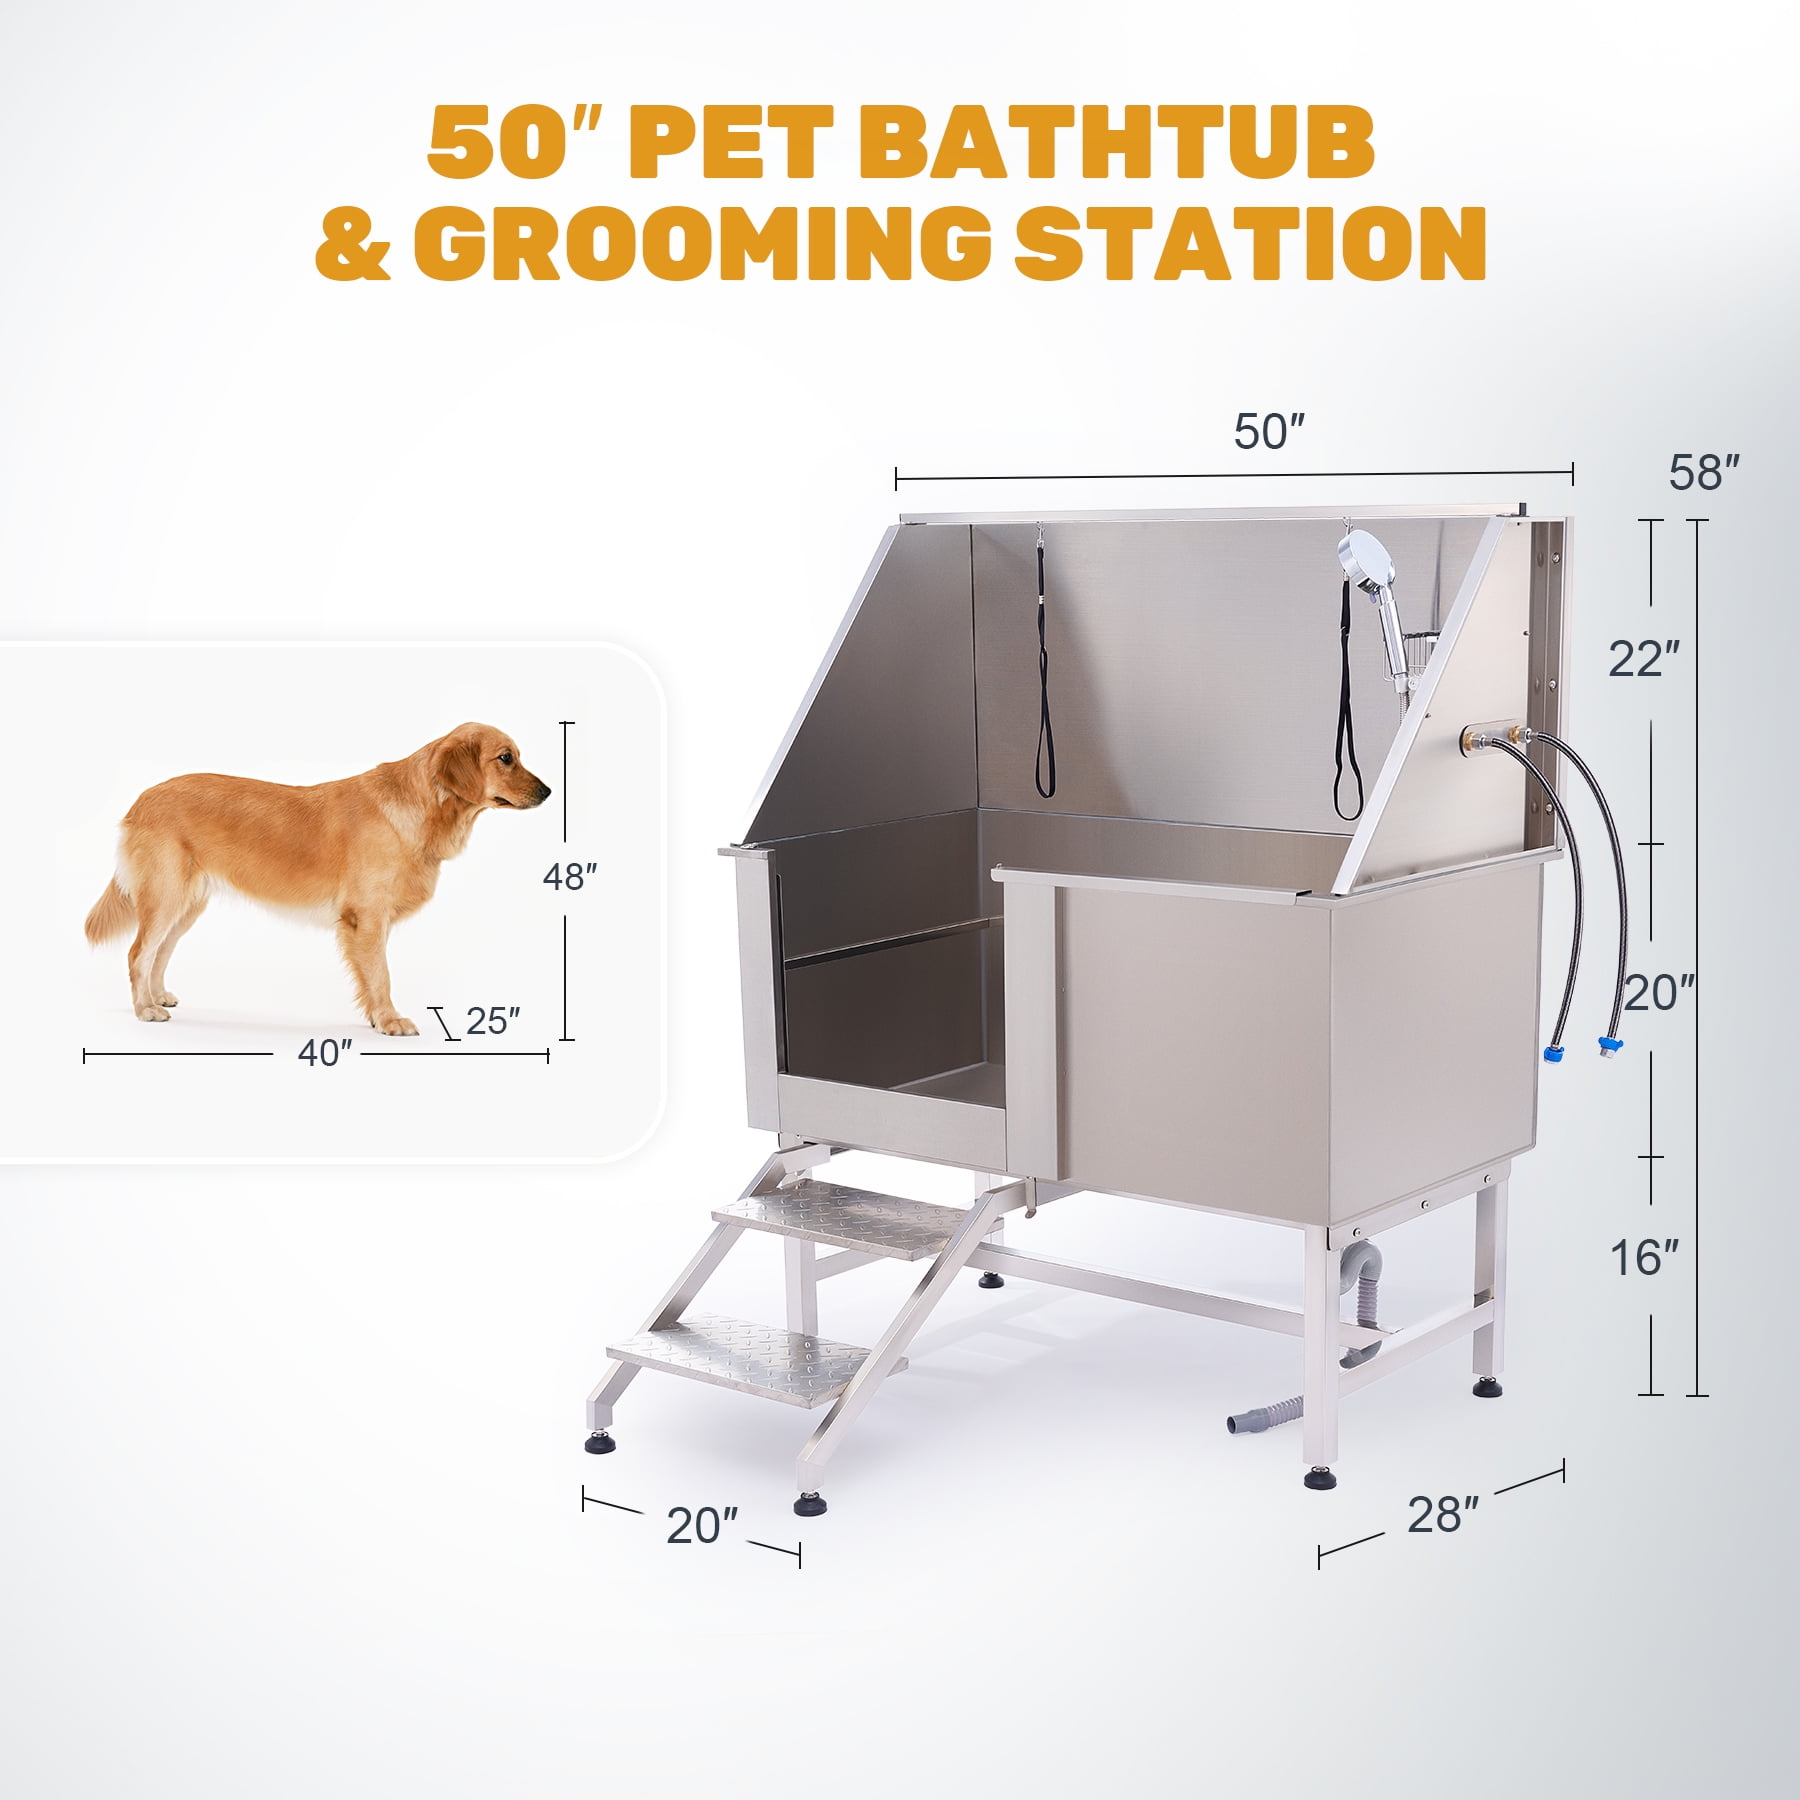 Stainless steel dog washing pool large pet grooming bath With Faucet  Accessorie